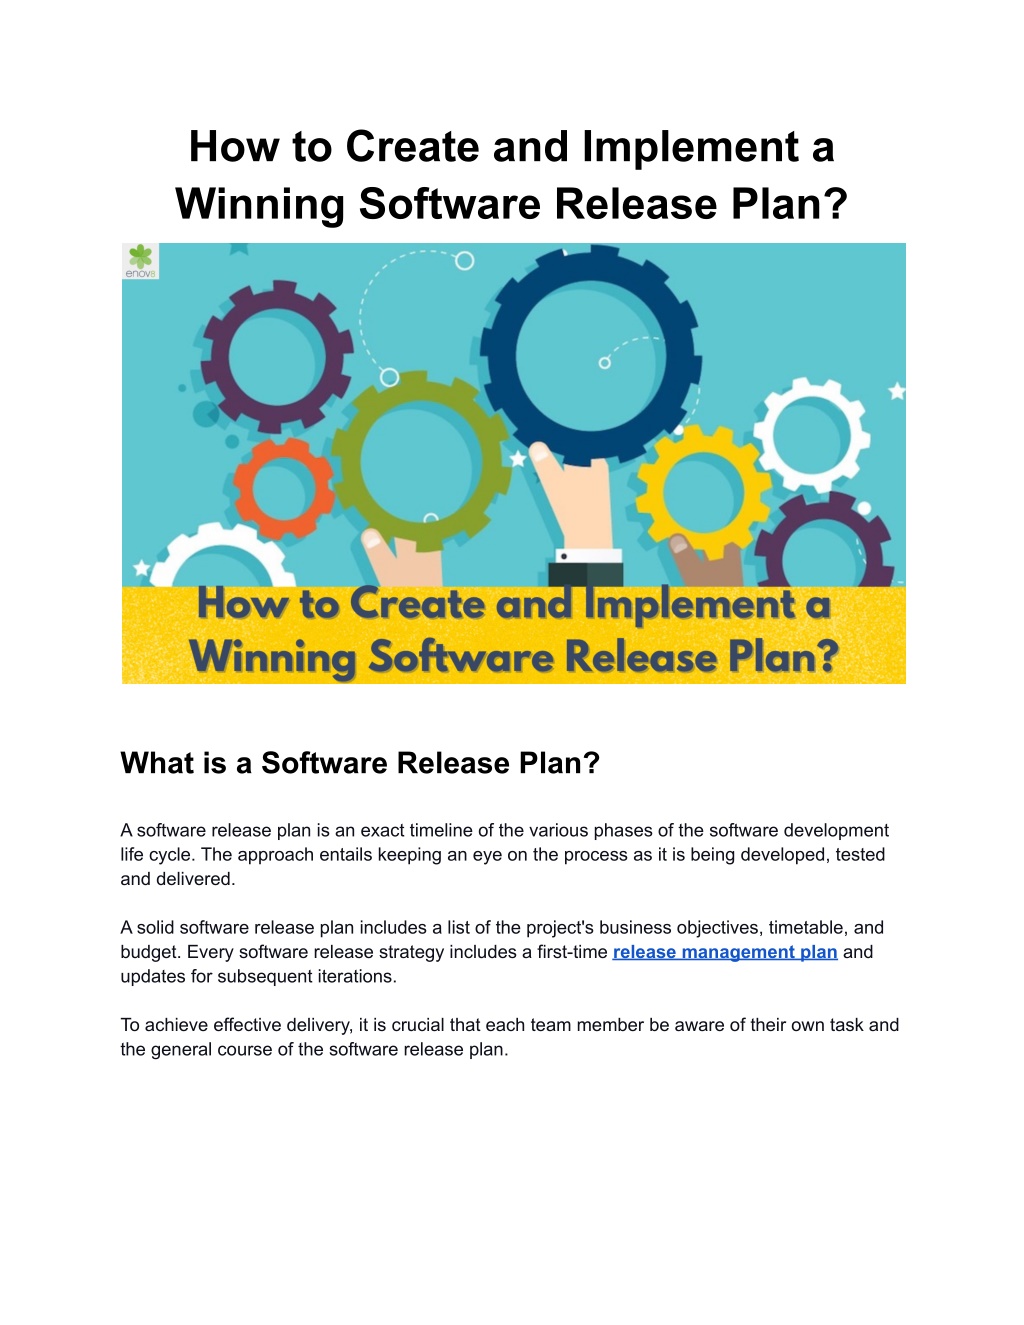 What is a software release?